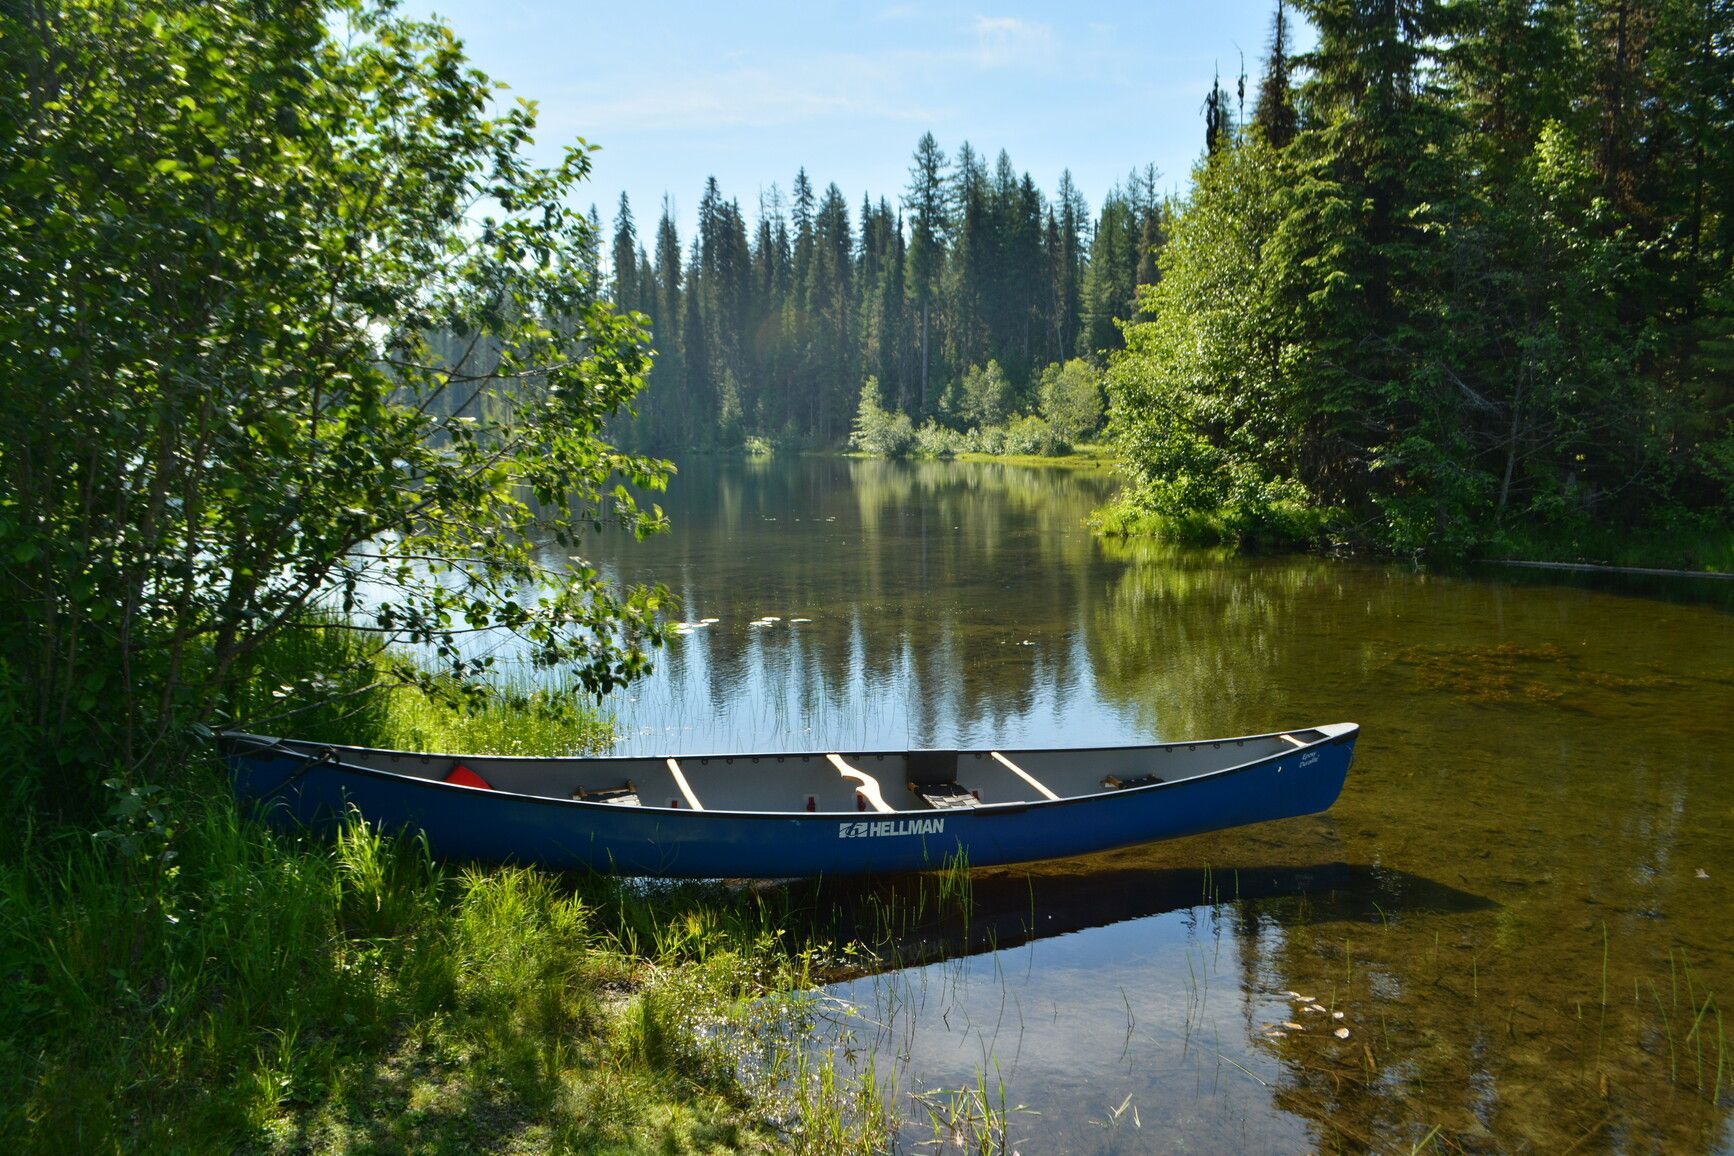 Embark on a peaceful journey through the beauty of nature by taking a canoe ride on Third Lake at Champion Lakes Park.